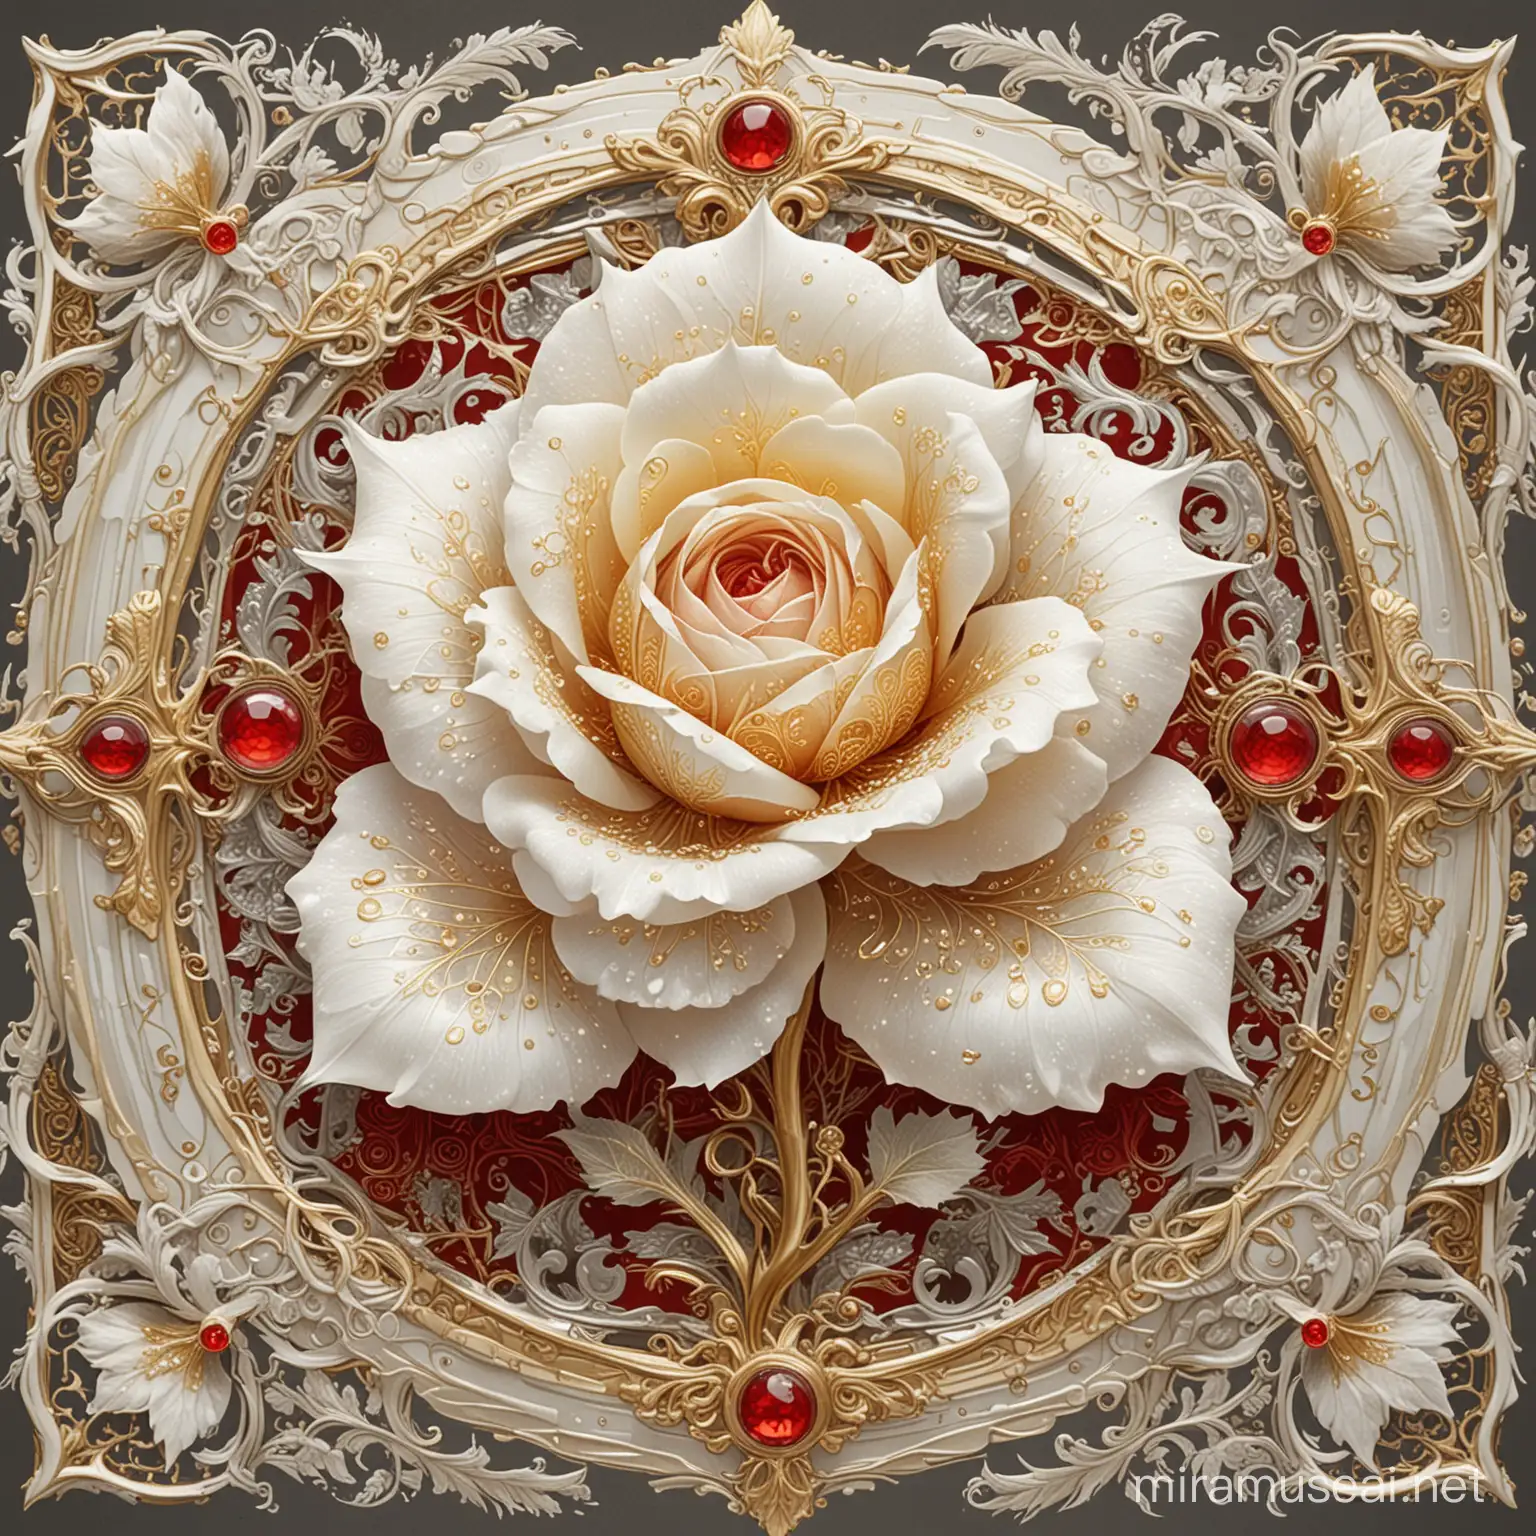 infographic of one morph ice rose artifact, specimens of ethereal white clear petals armored with intricate gold lacing, very delicate and beautiful, FINAL FANTASY 10, red gemstone decoration, lithograph, good design sense, highly detailed, Art Nouveau style illustration, watercolor on paper